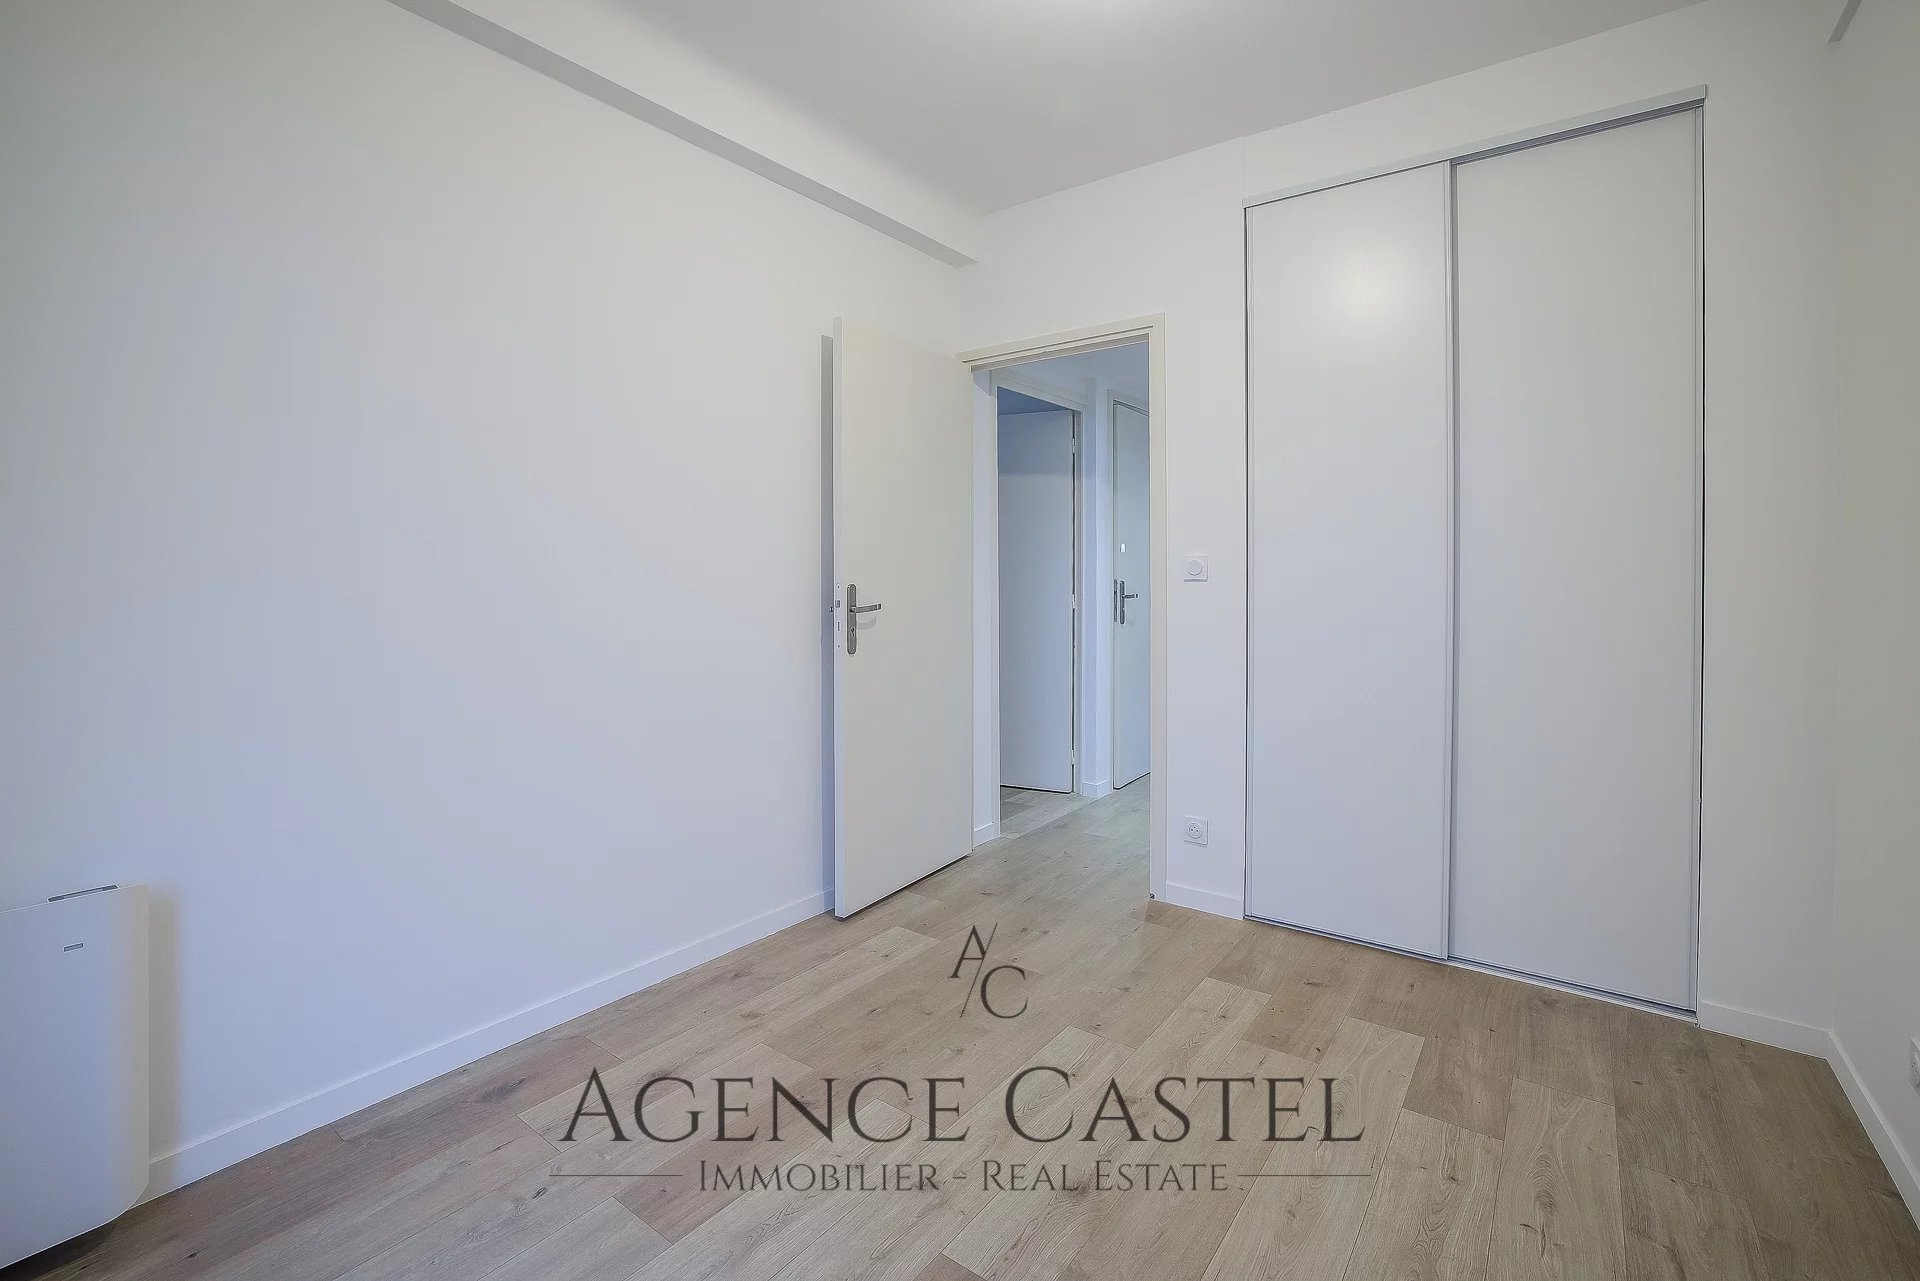 NICE CESSOLE - SUPERB 2 BEDROOM APARTMENT WITH BALCONY